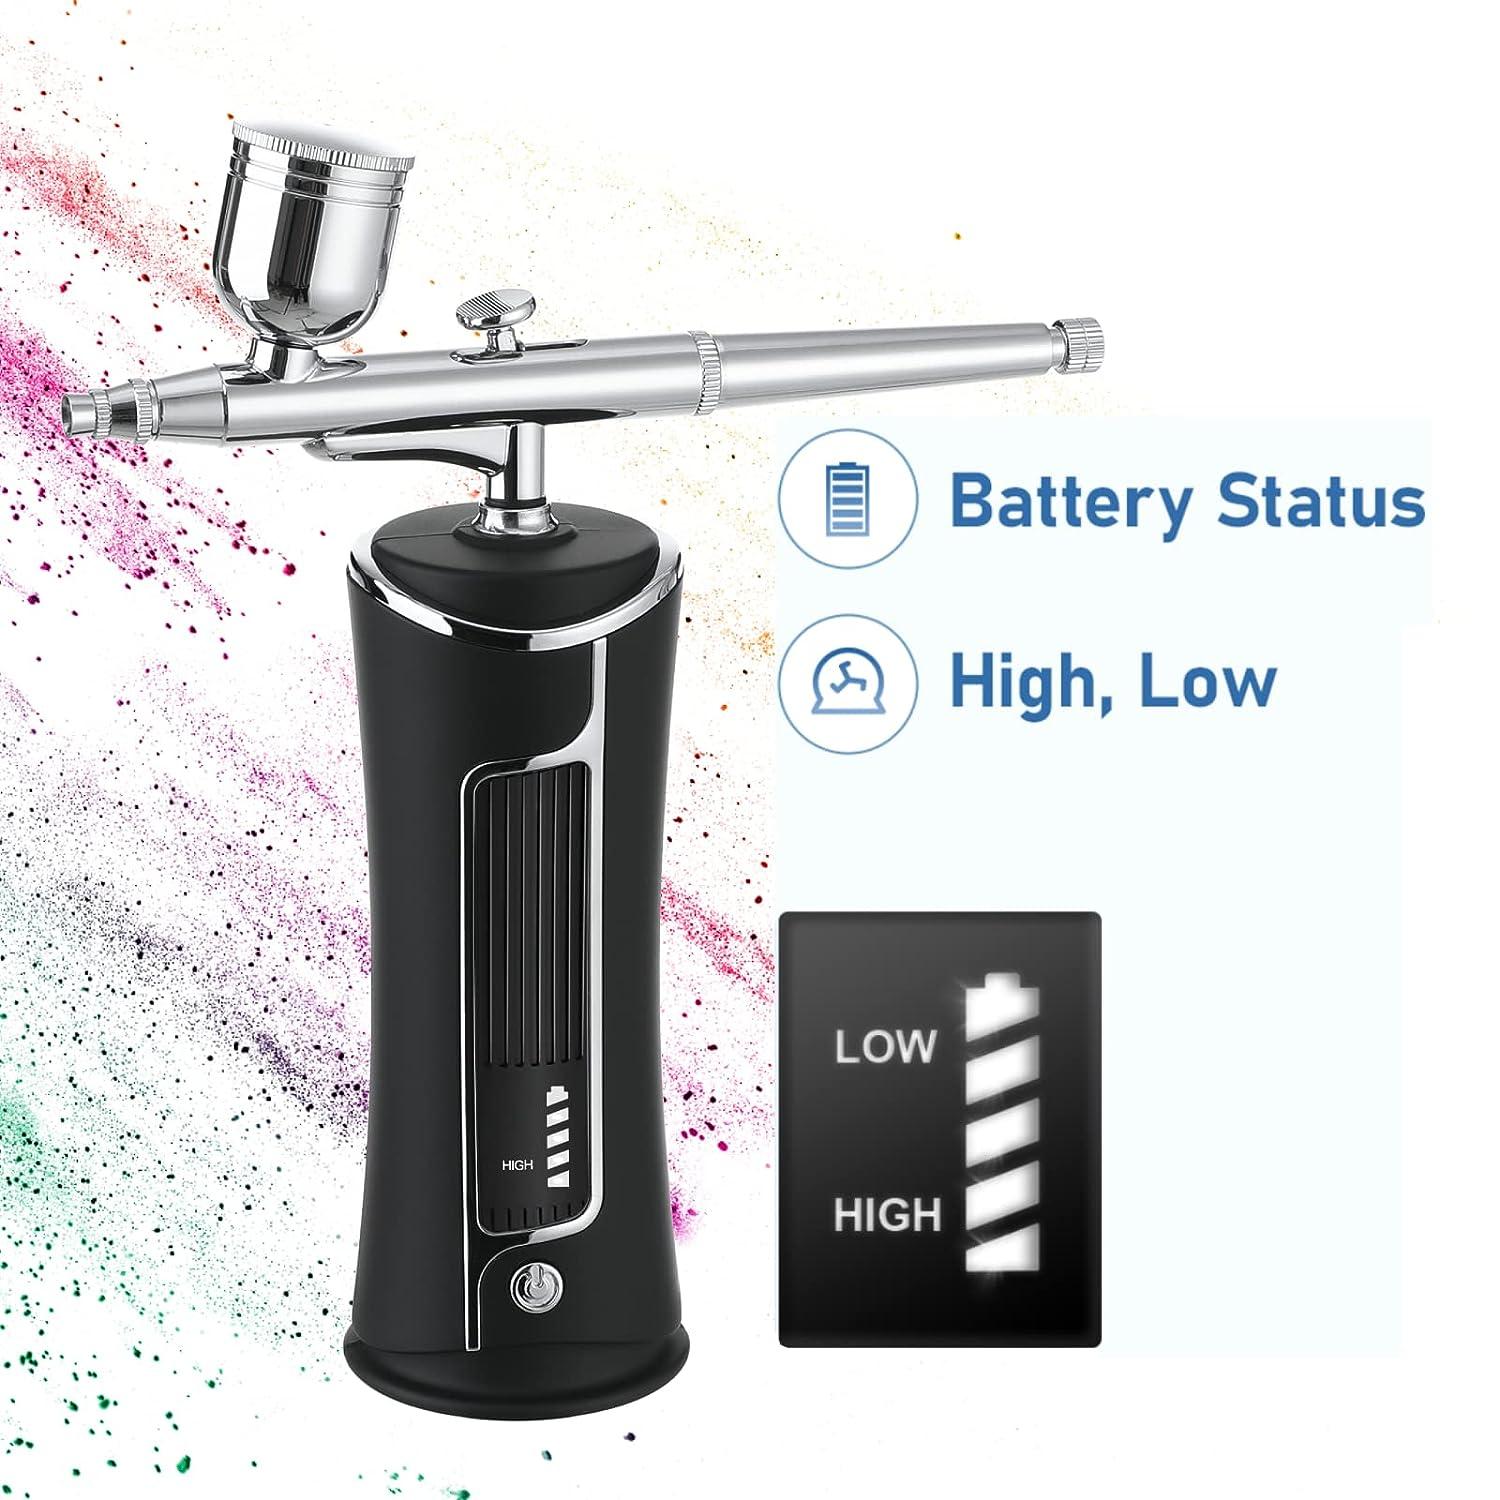 Airbrush Kit With Compressor, Portable Cordless Air Brush Spray